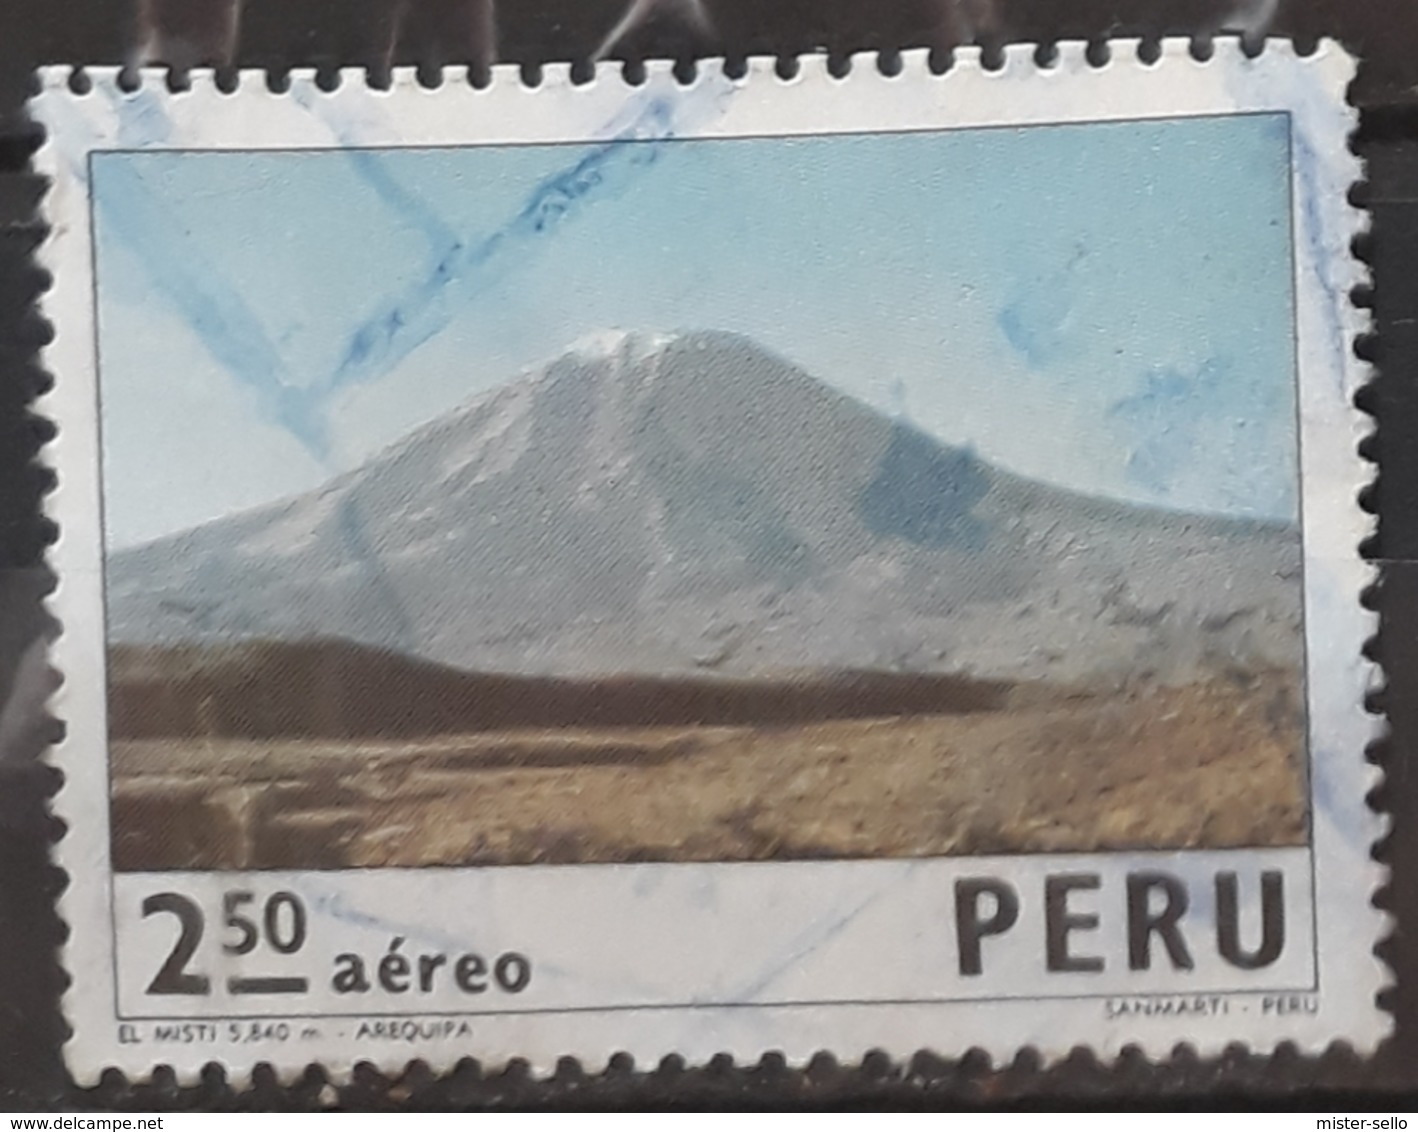 PERU 1974 Airmail - "Landscapes And Cities". USADO - USED. - Perú